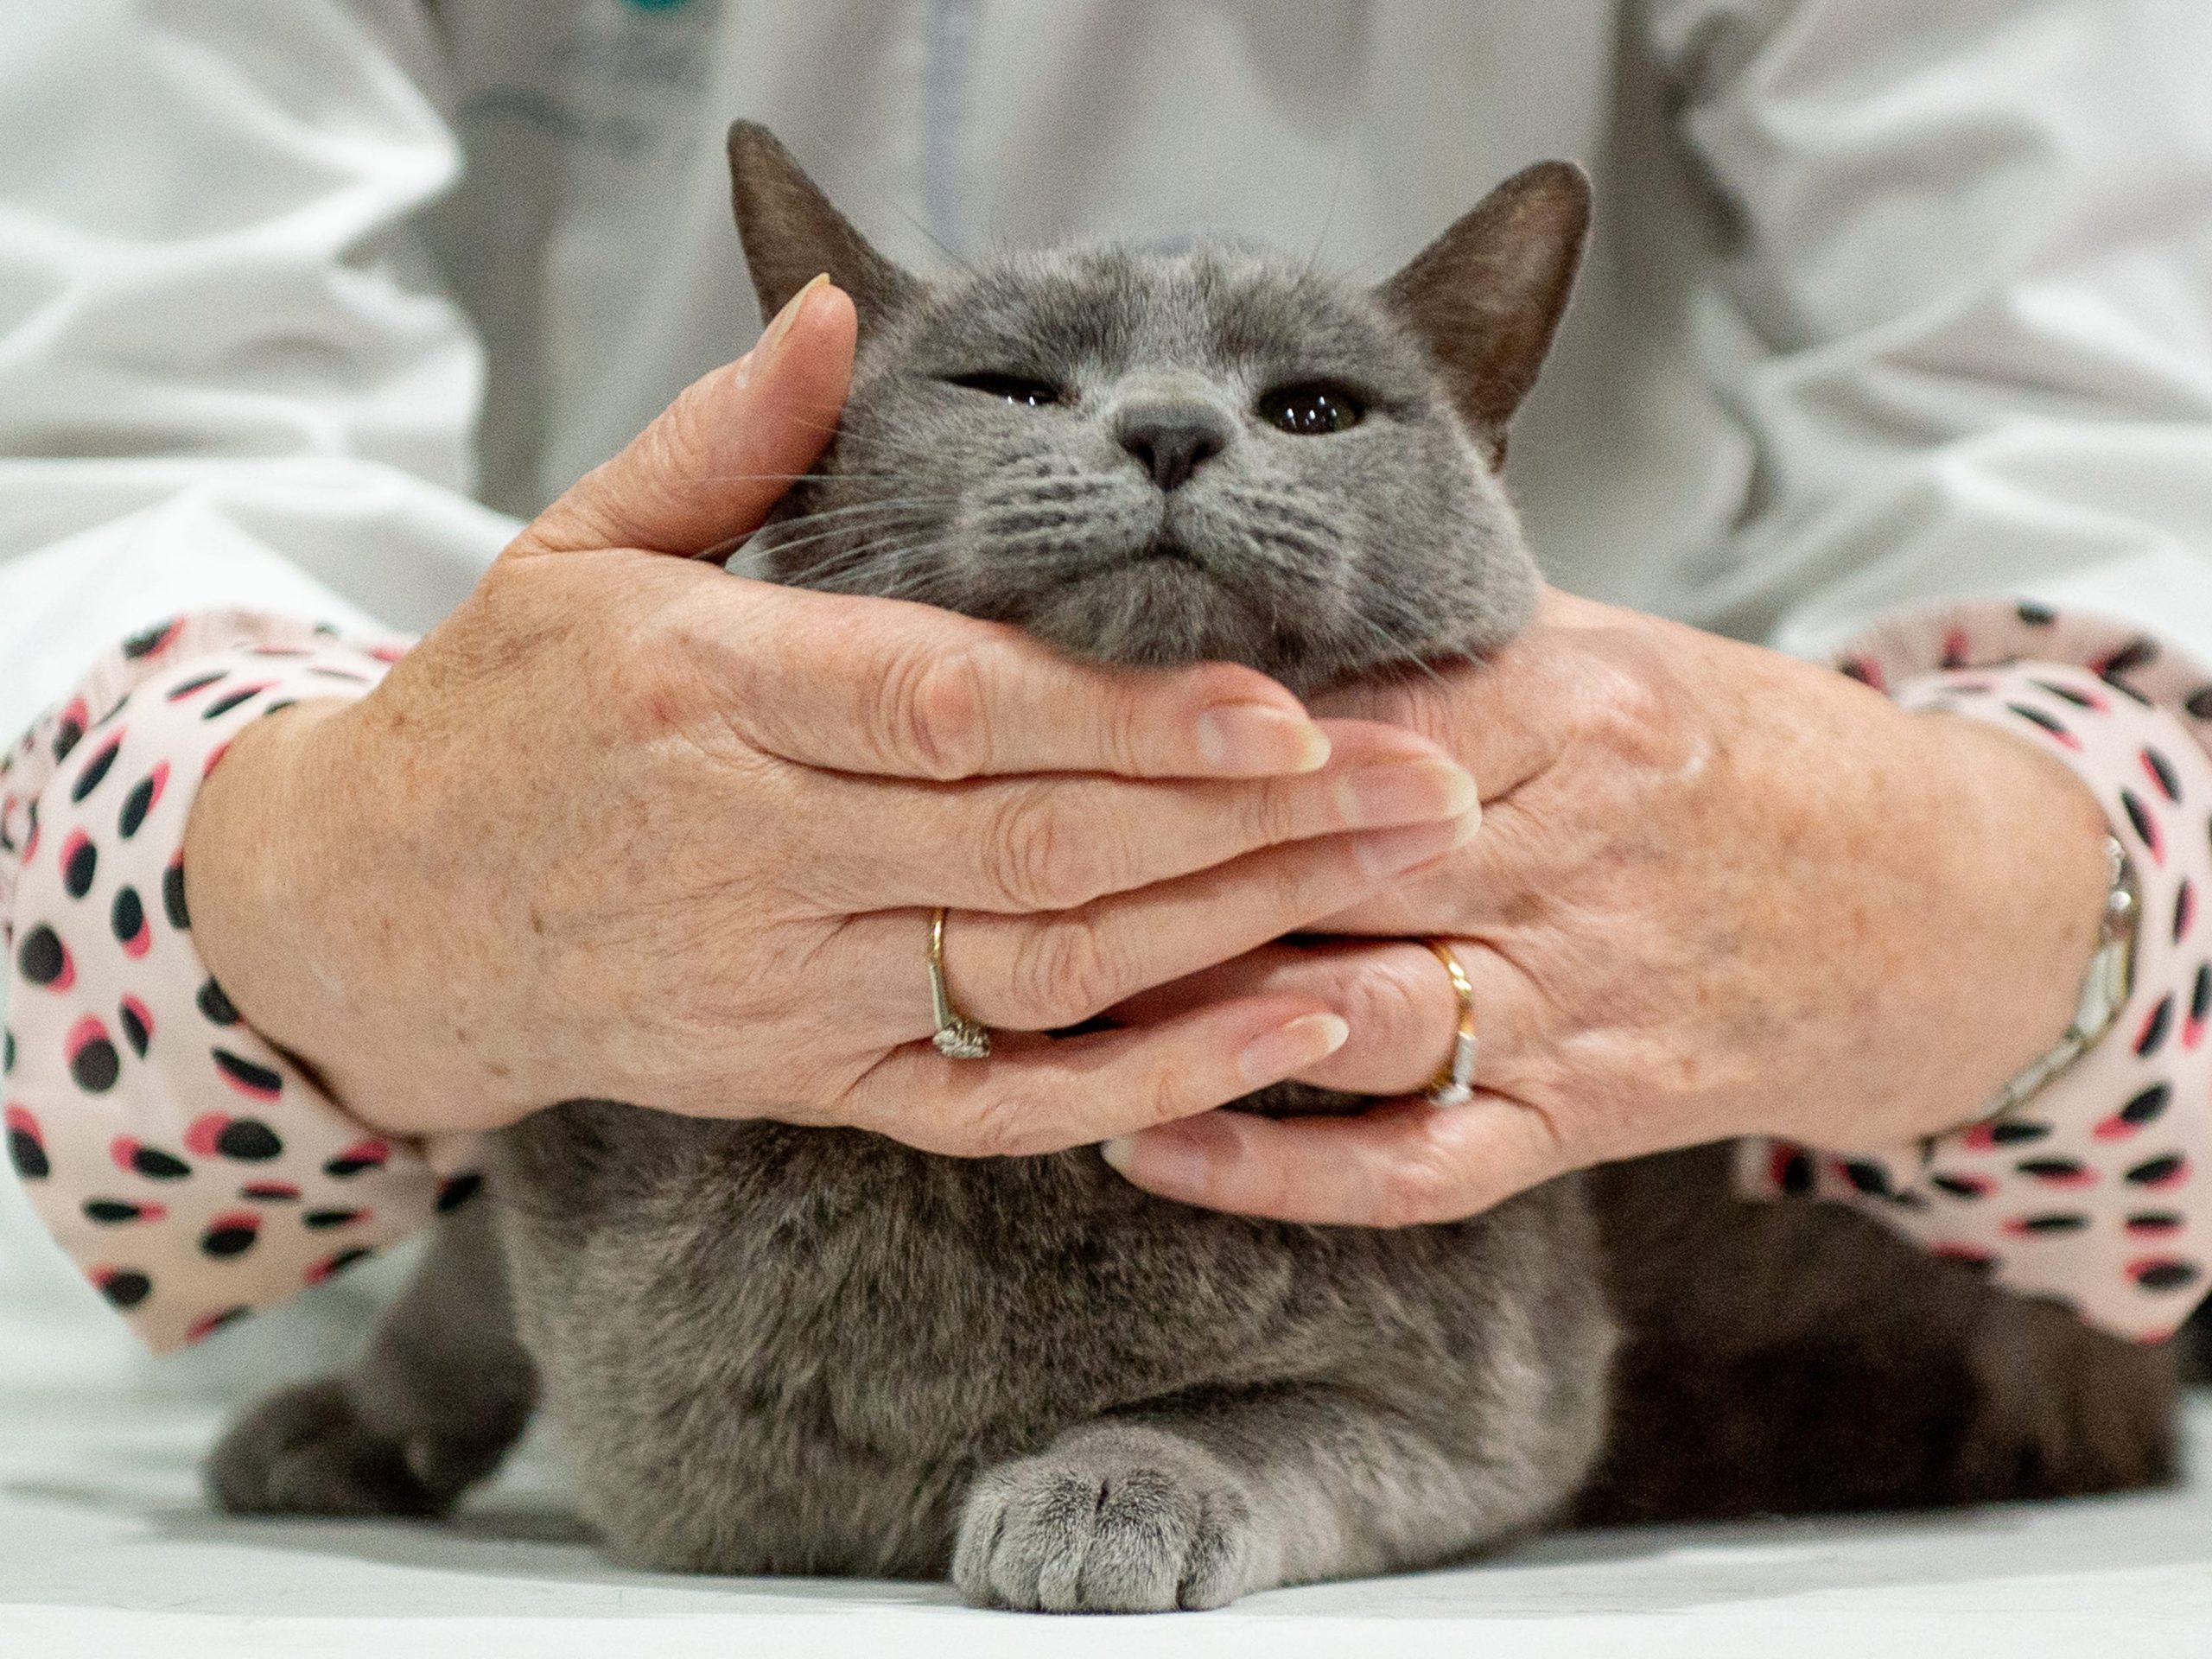 An image of a Russian blue cat with its face being framed by a pair of hands.